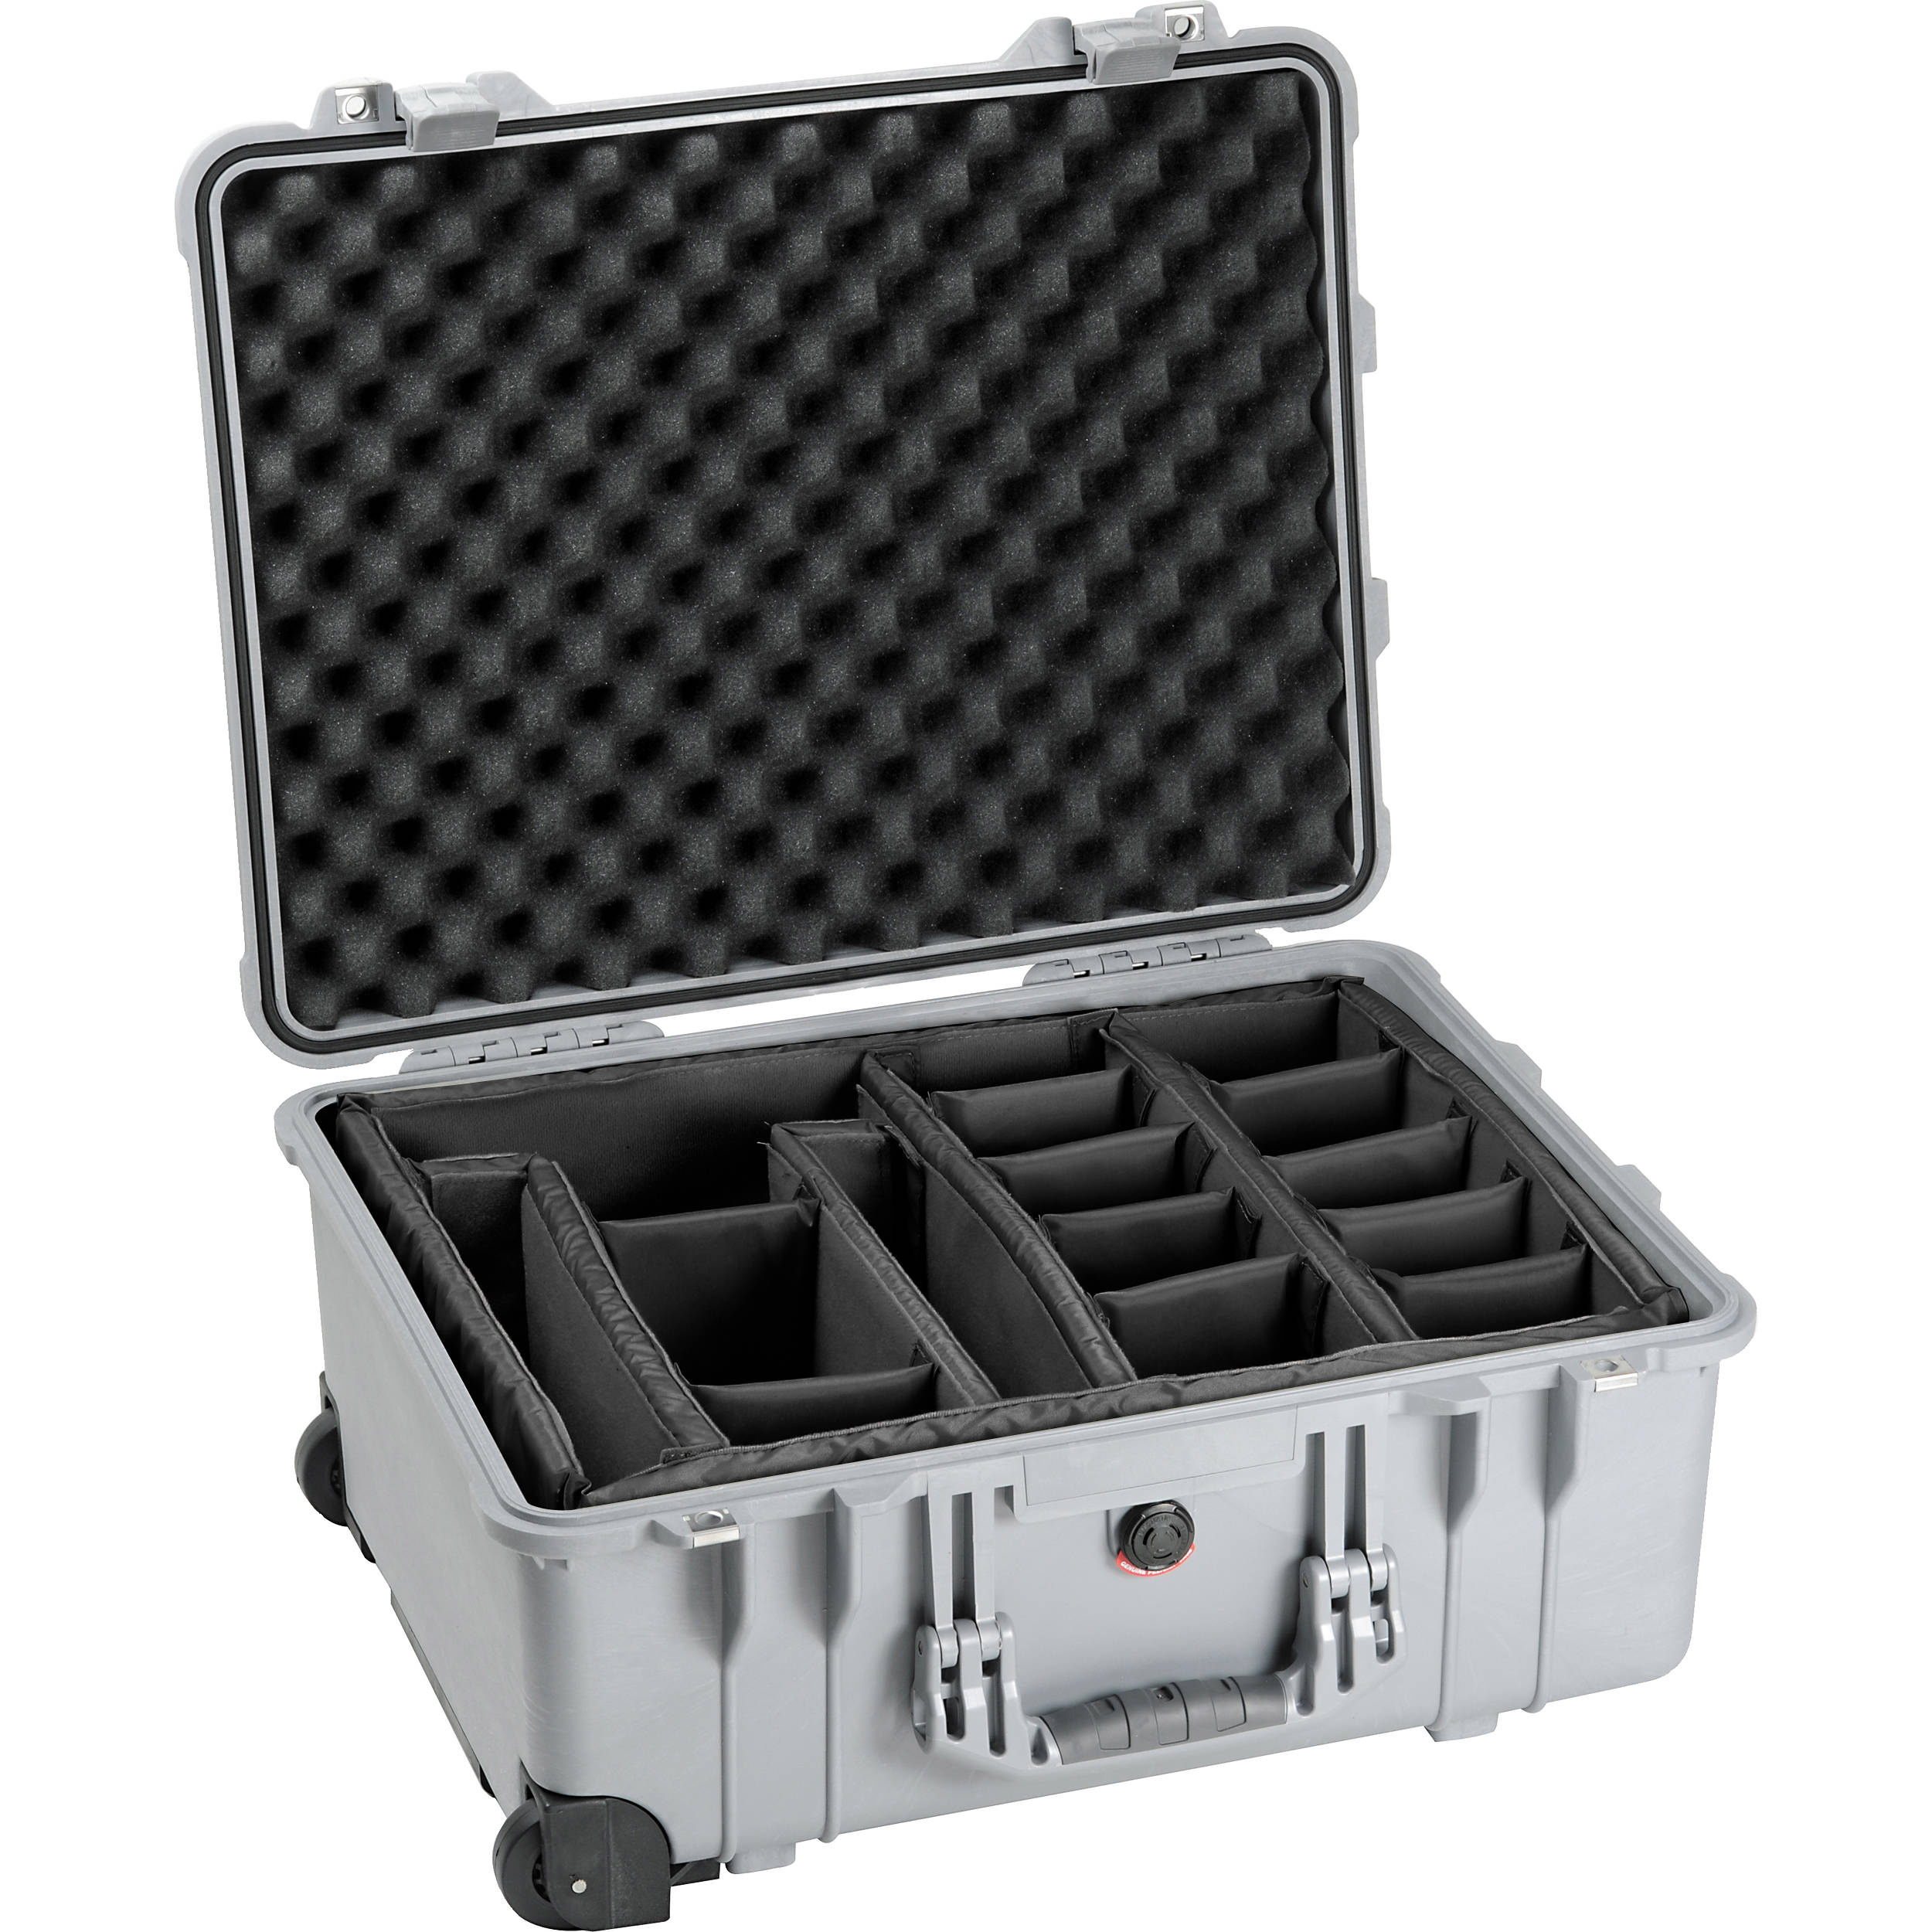 Pelican 1564 Case - With Padded Divider Set (Silver)